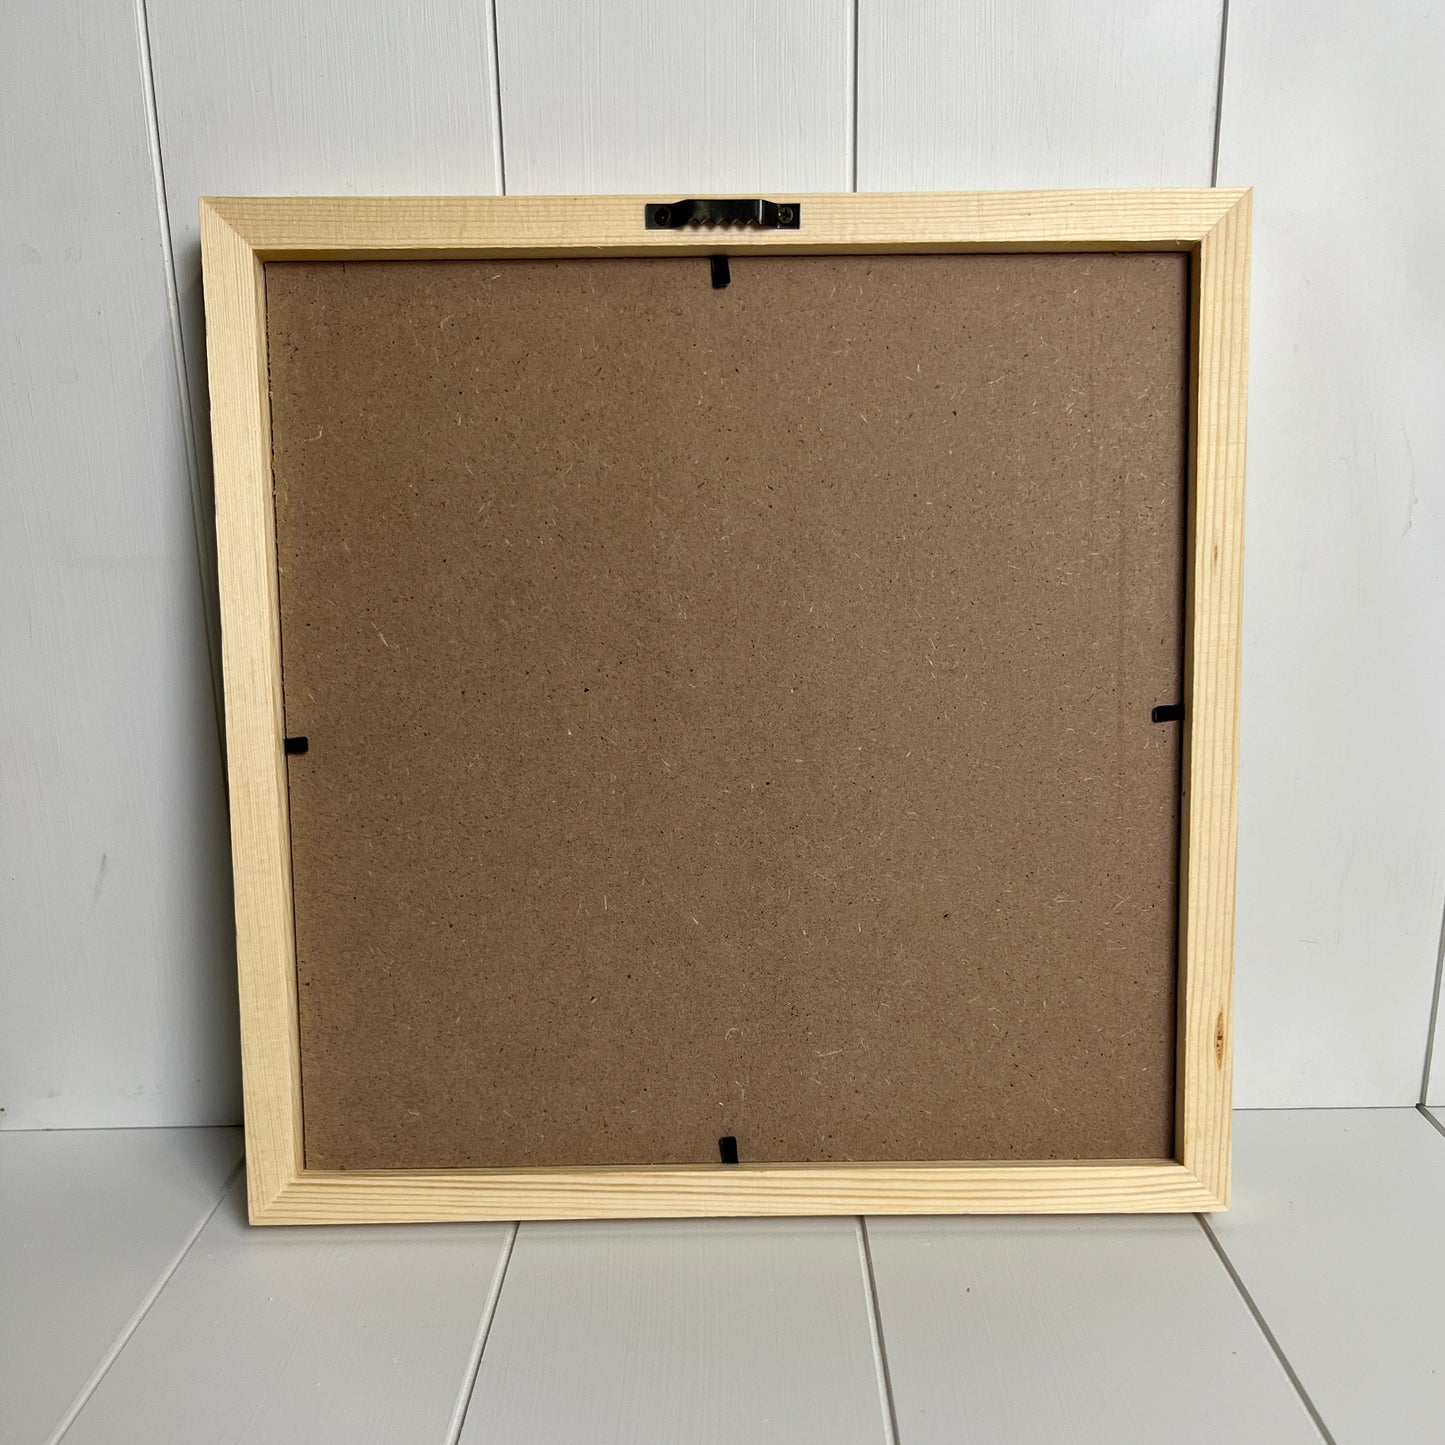 WHOLESALE: 11x11 inch Unstained Wood Frames with Removable Backs